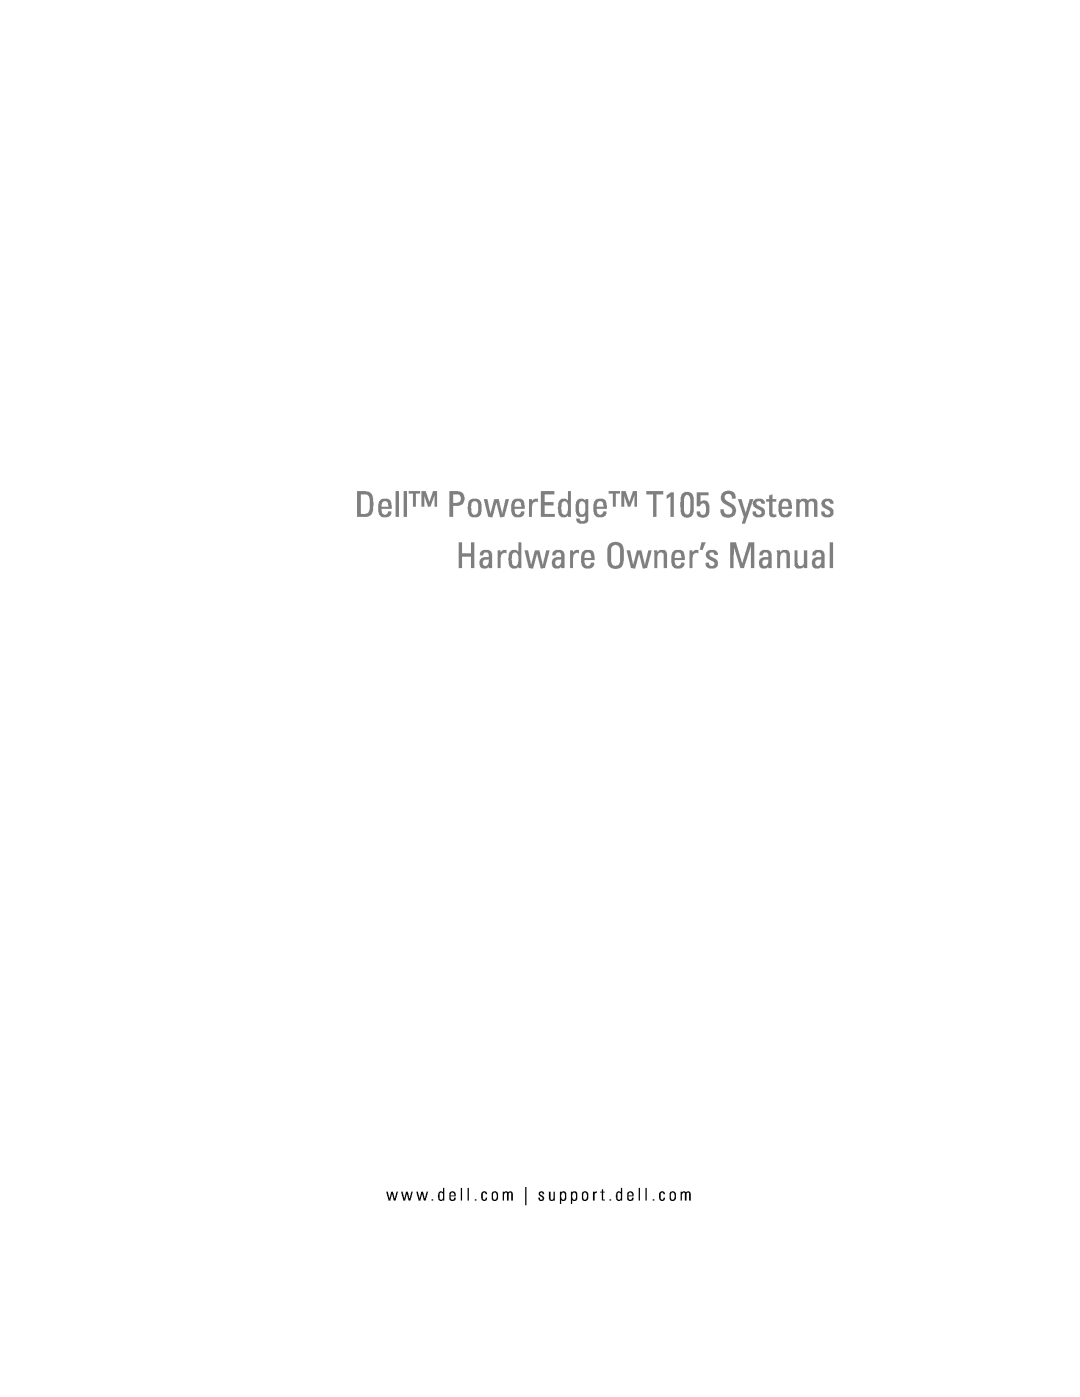 Dell owner manual Dell PowerEdge T105 Systems Hardware Owner’s Manual 